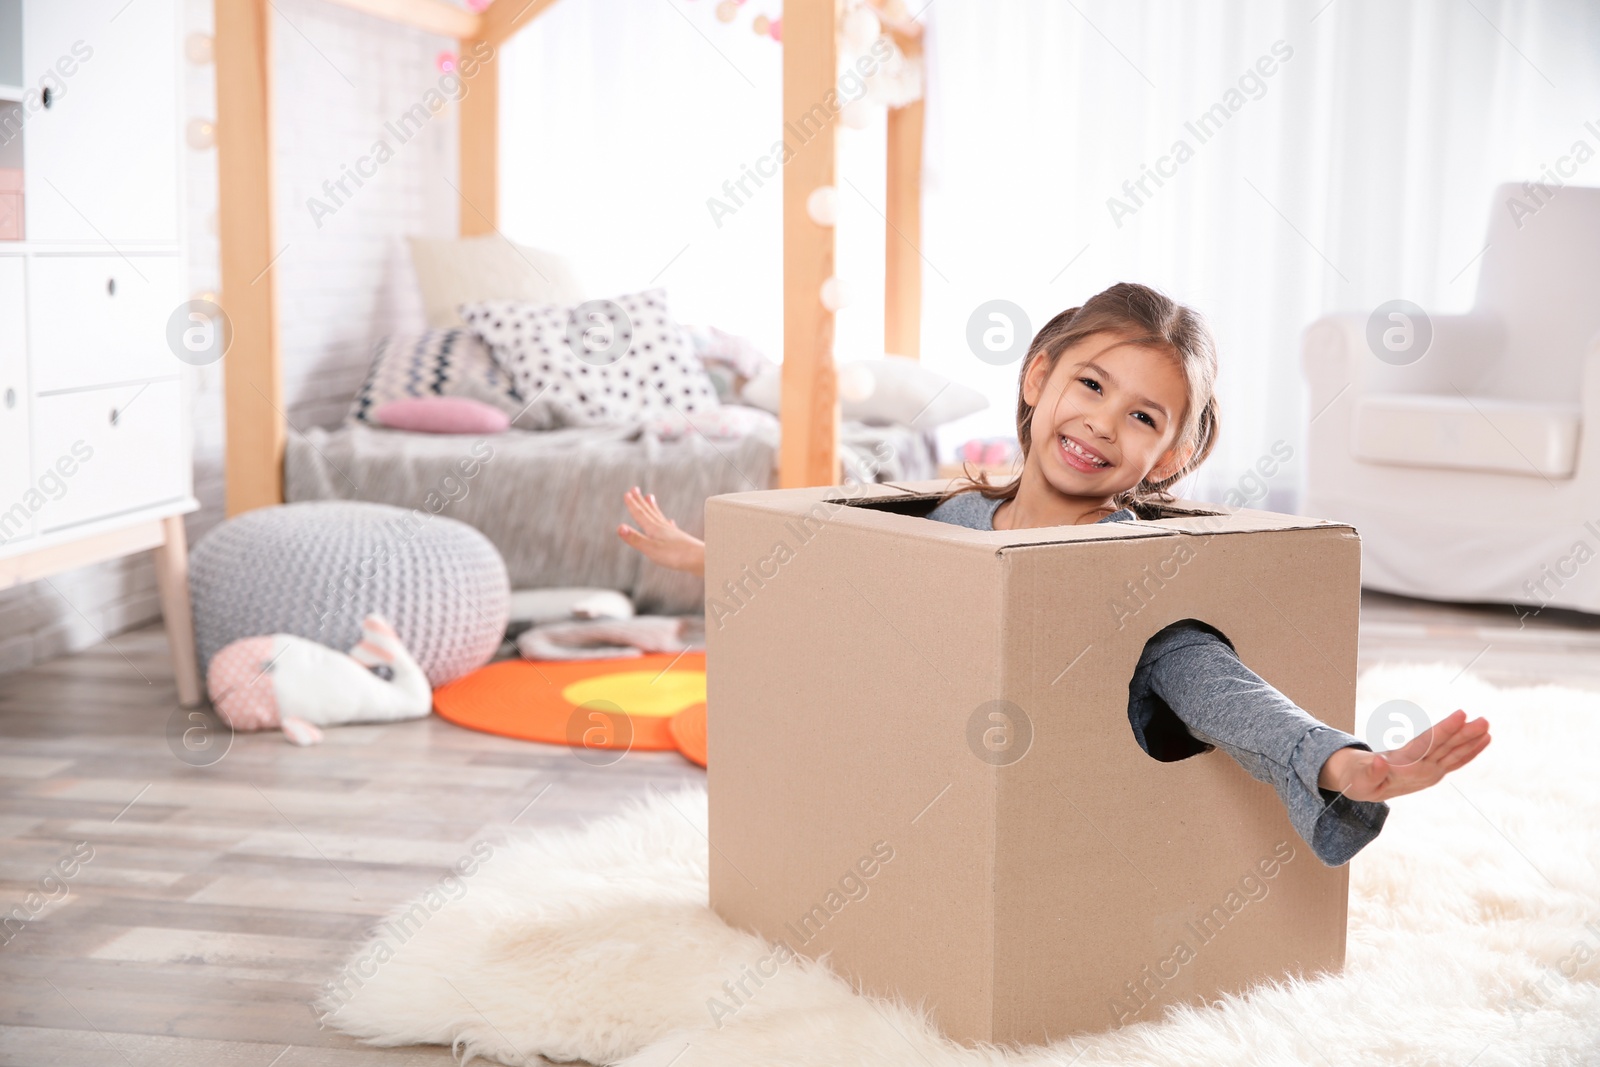 Photo of Cute little girl playing with cardboard box in bedroom